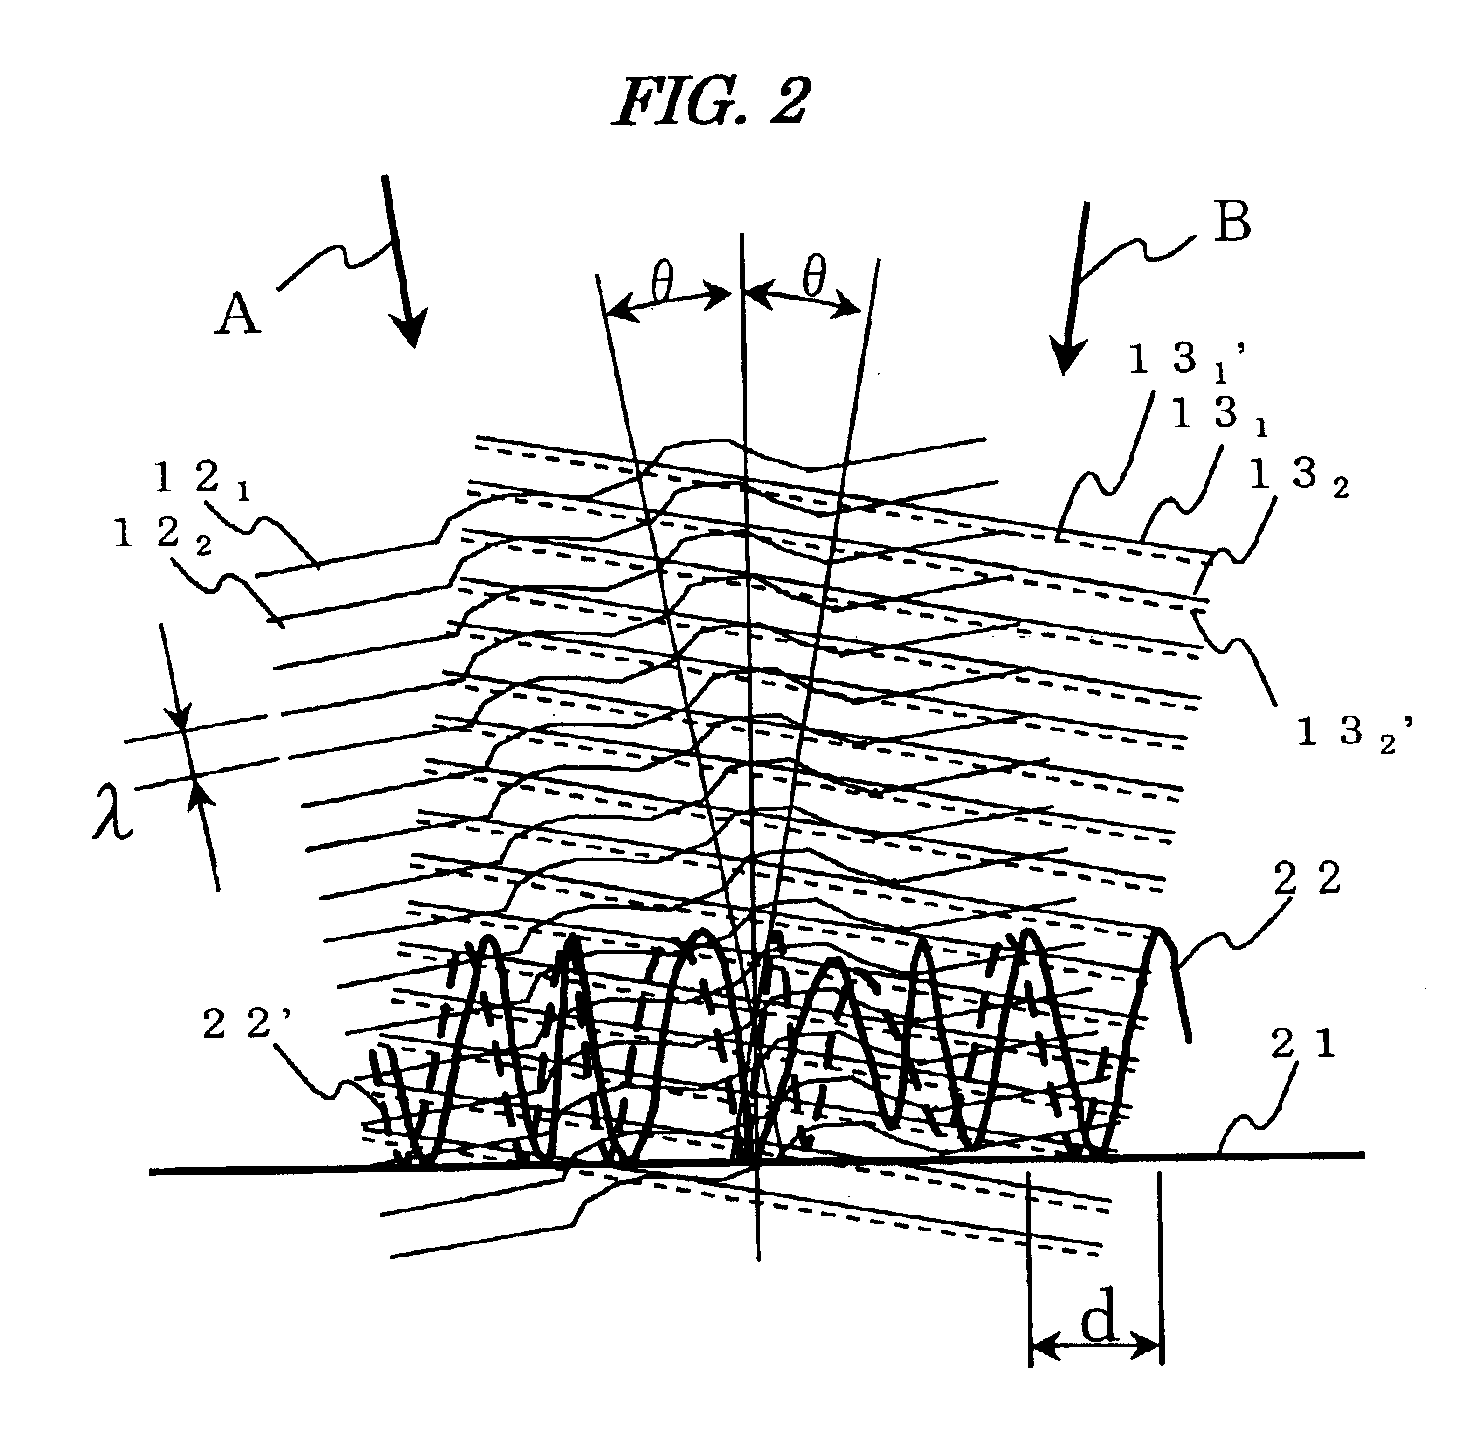 Interference measuring device